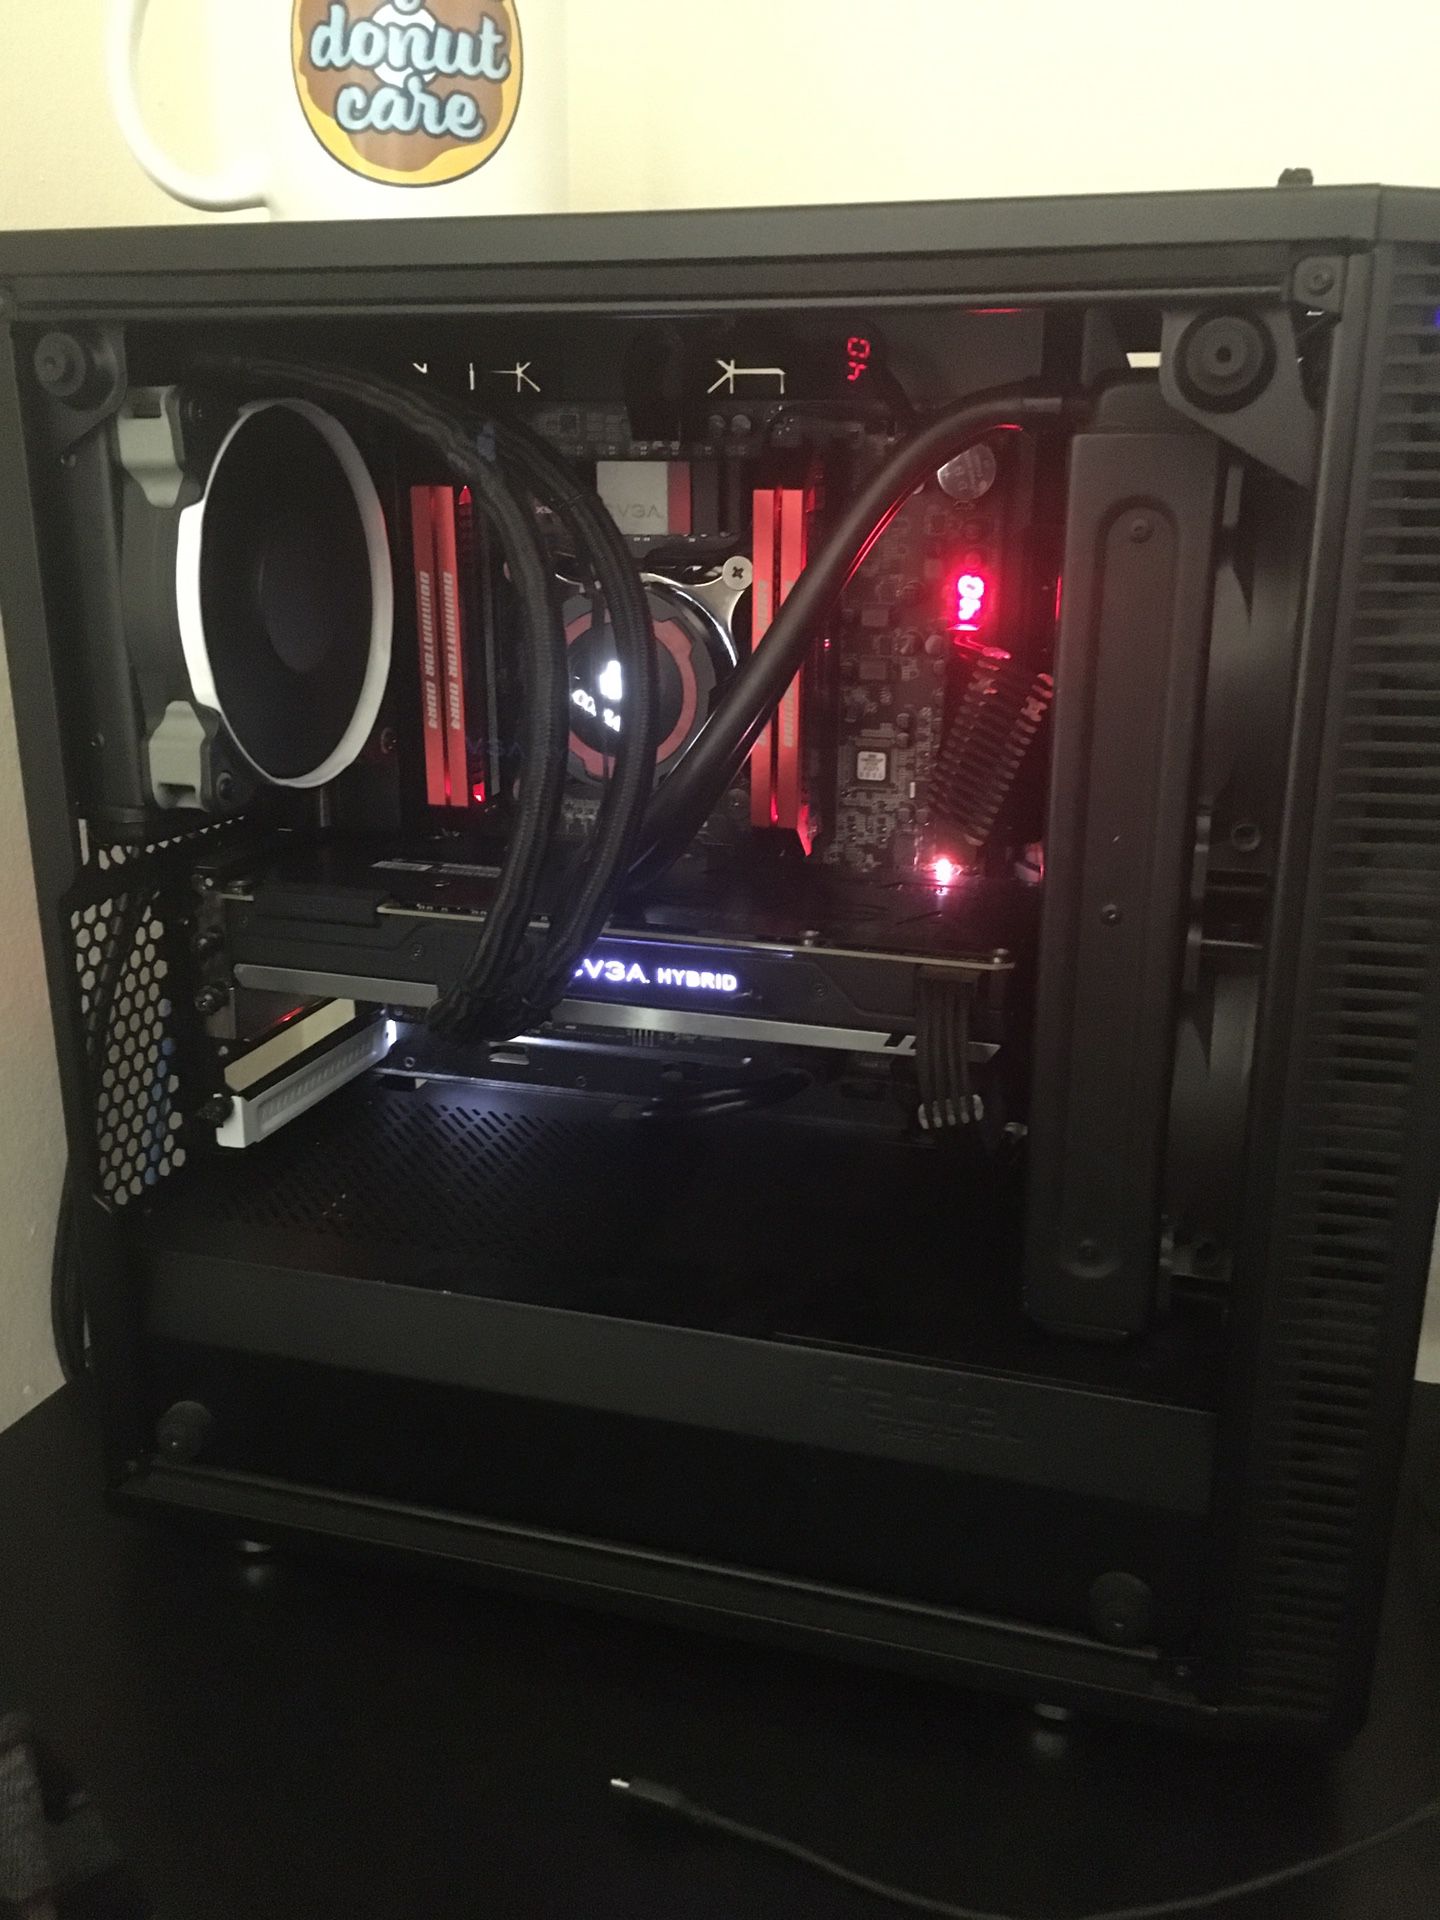 Gaming pc 5820k and gtx 1070 16gb of ram